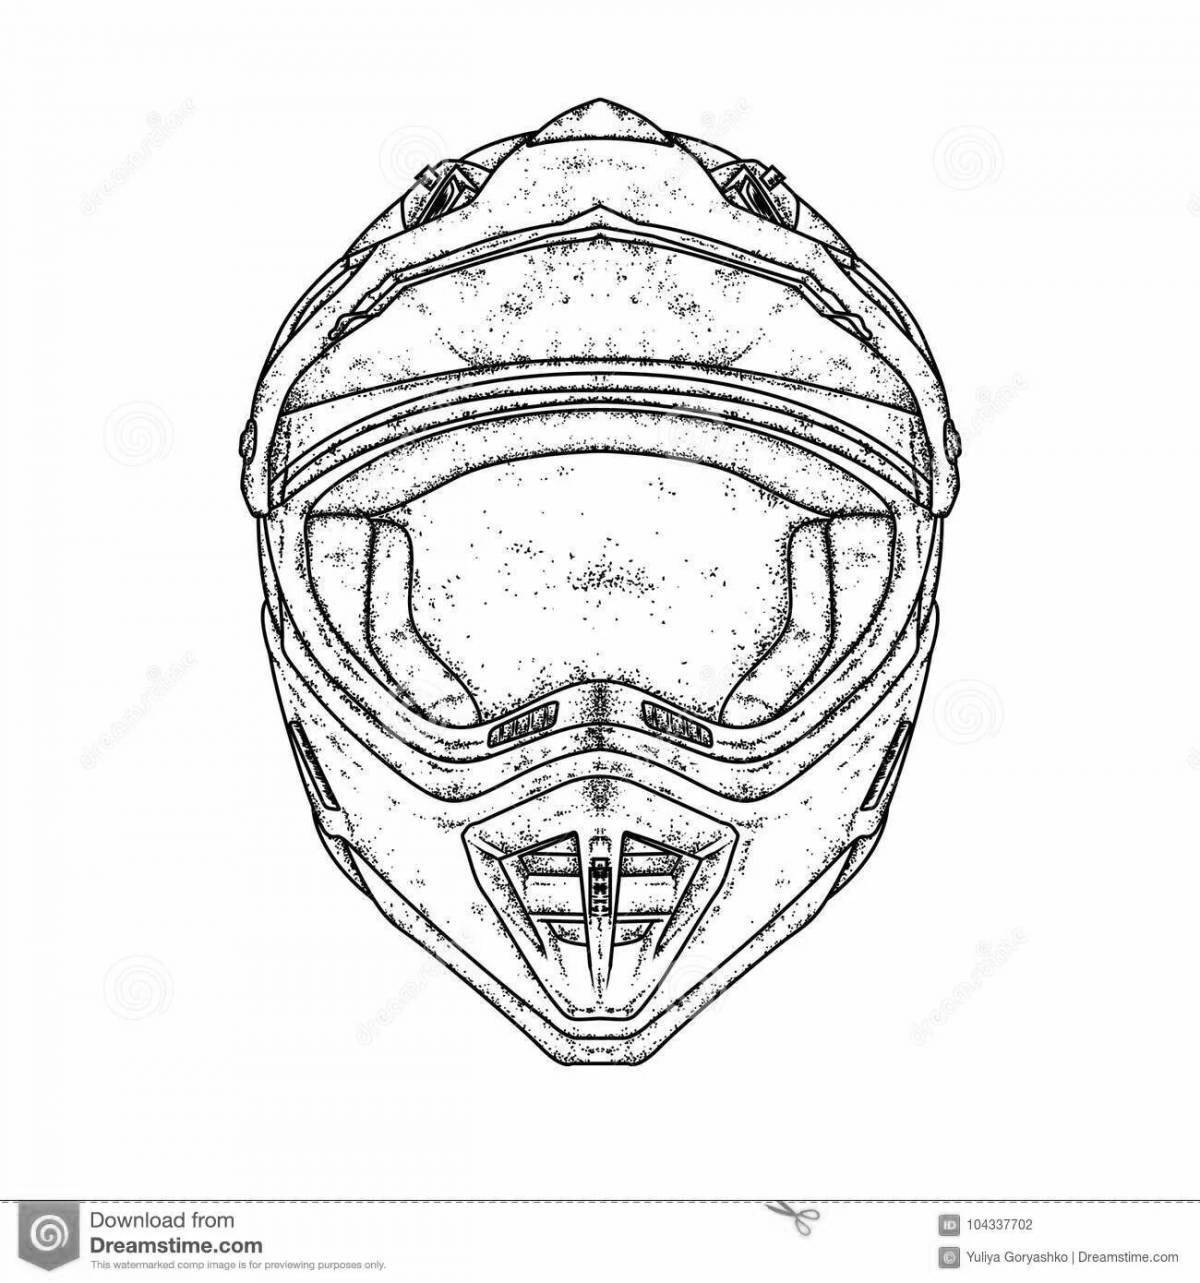 Coloring page with motorcycle helmet